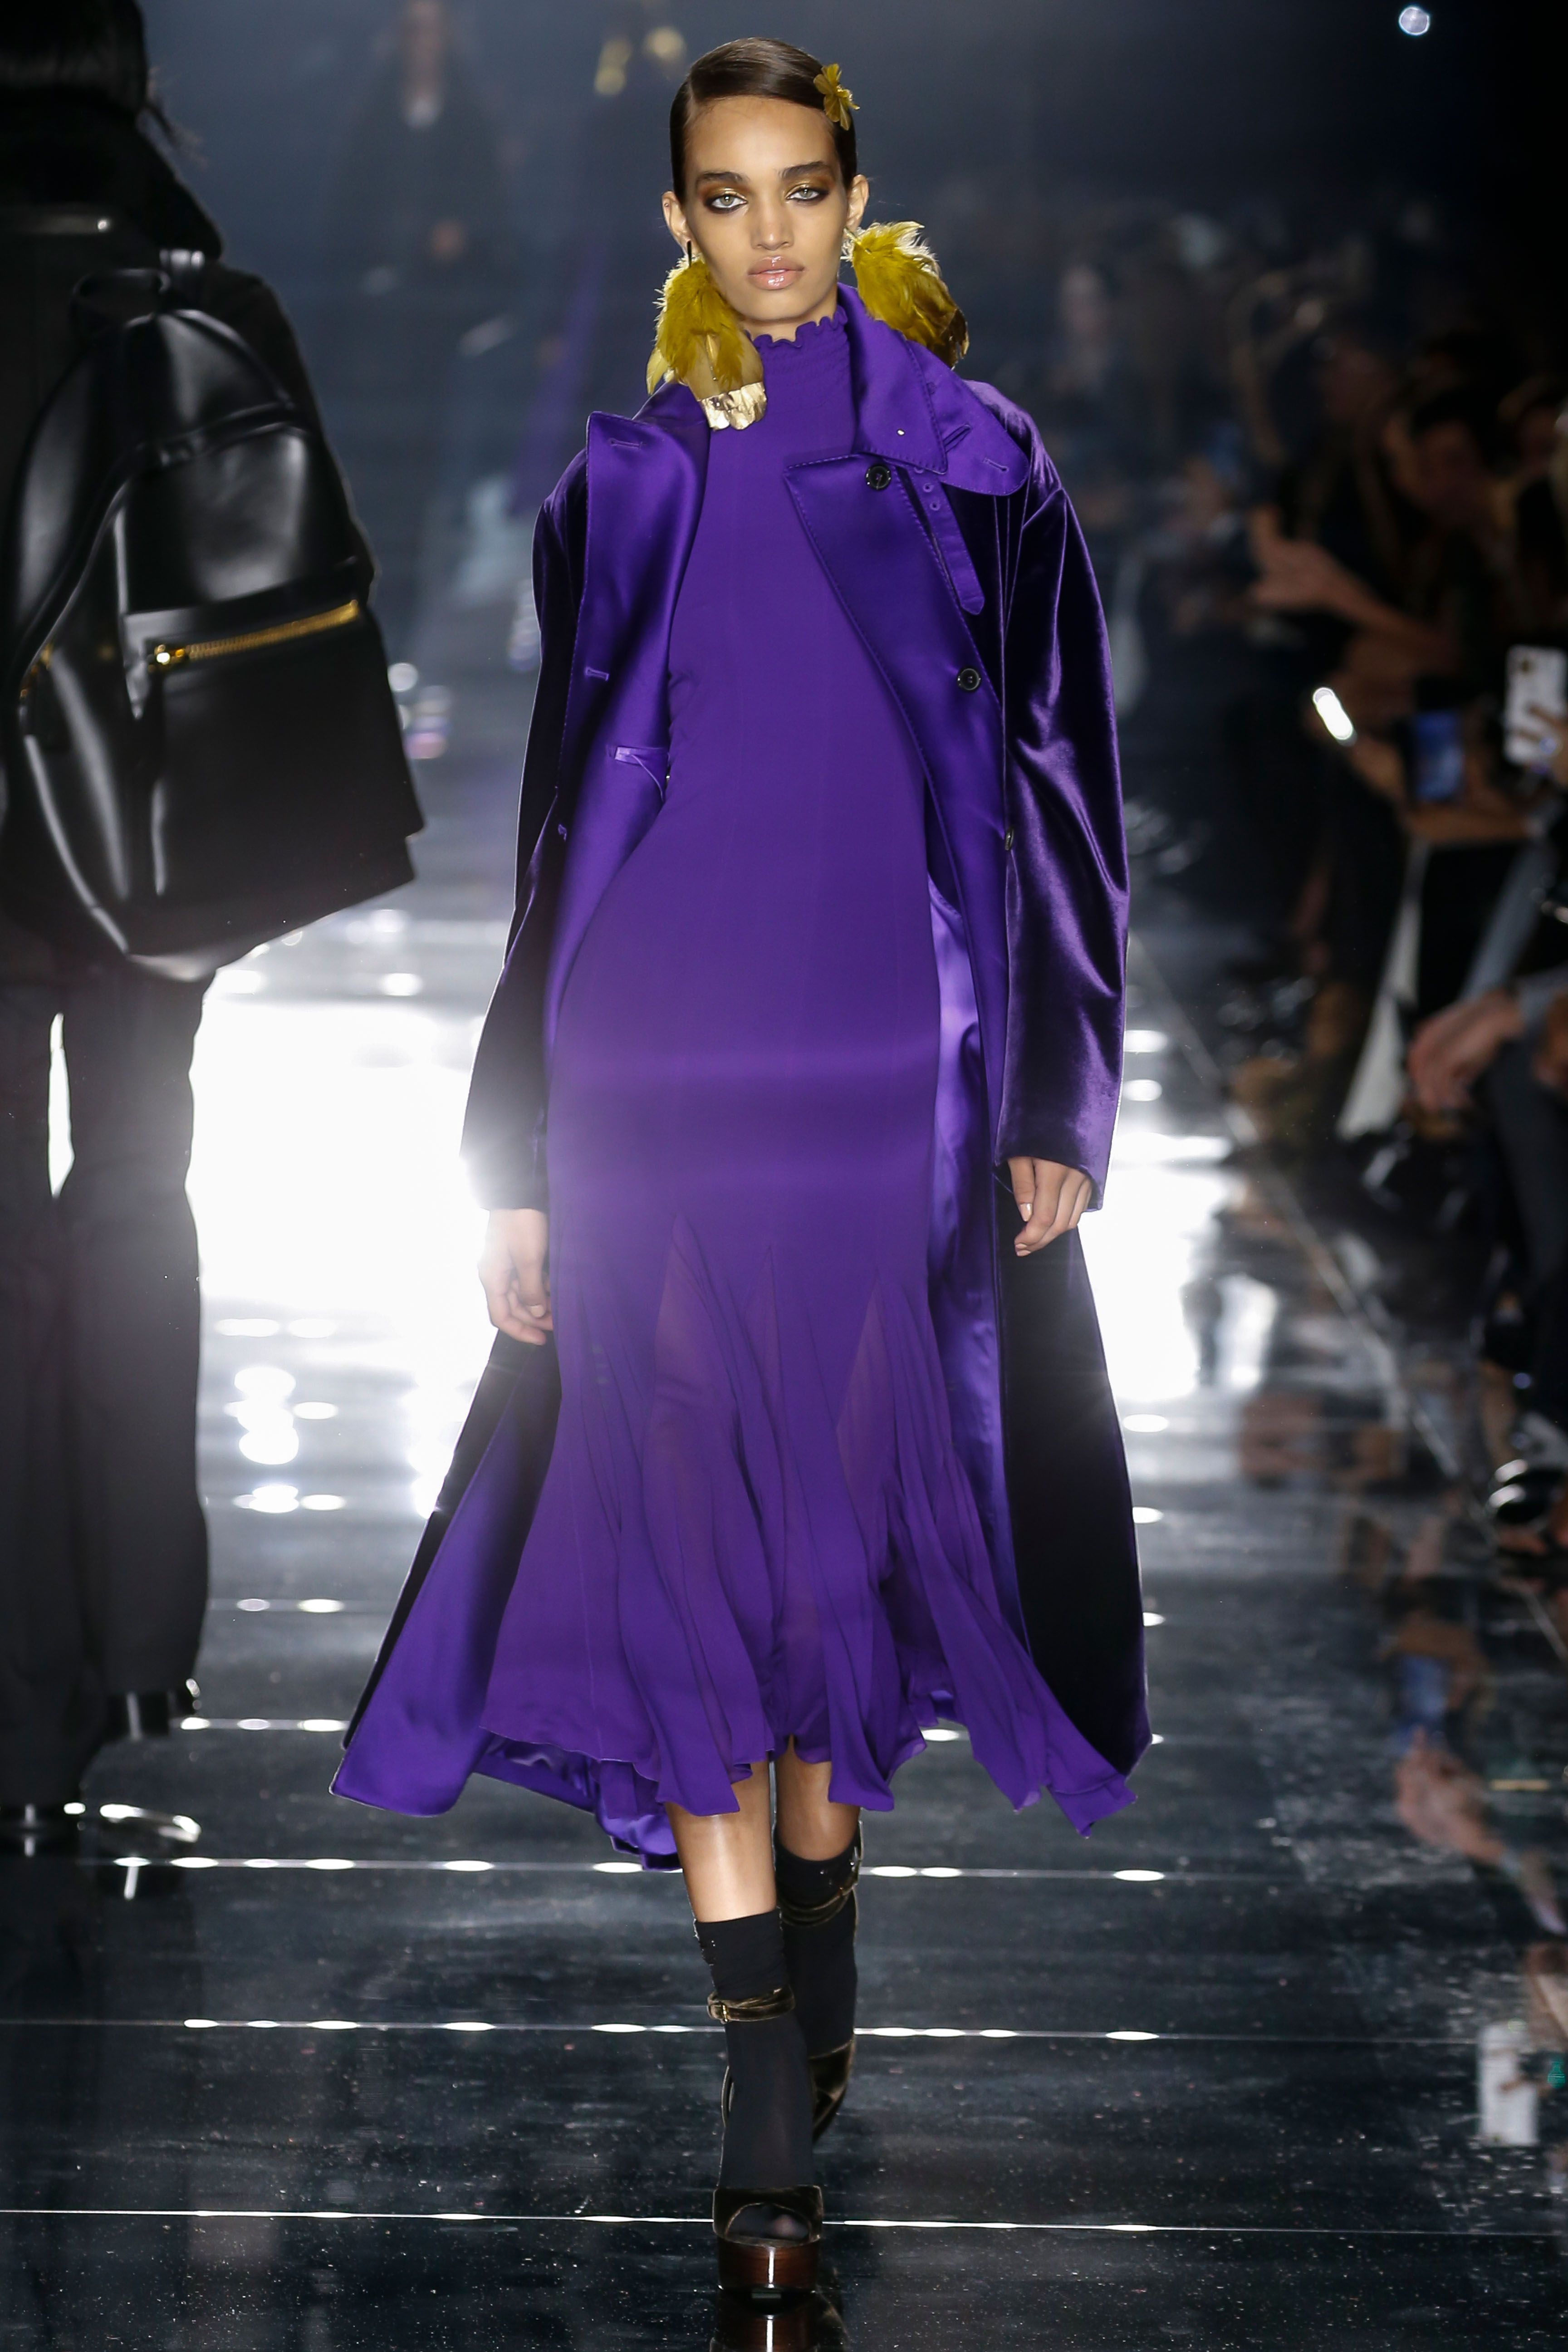 TOM FORD - The Women's Autumn/Winter 2021 Collection features bold colors  yet delicately crafted ready to wear. #TOMFORD #TOMFORDAW21